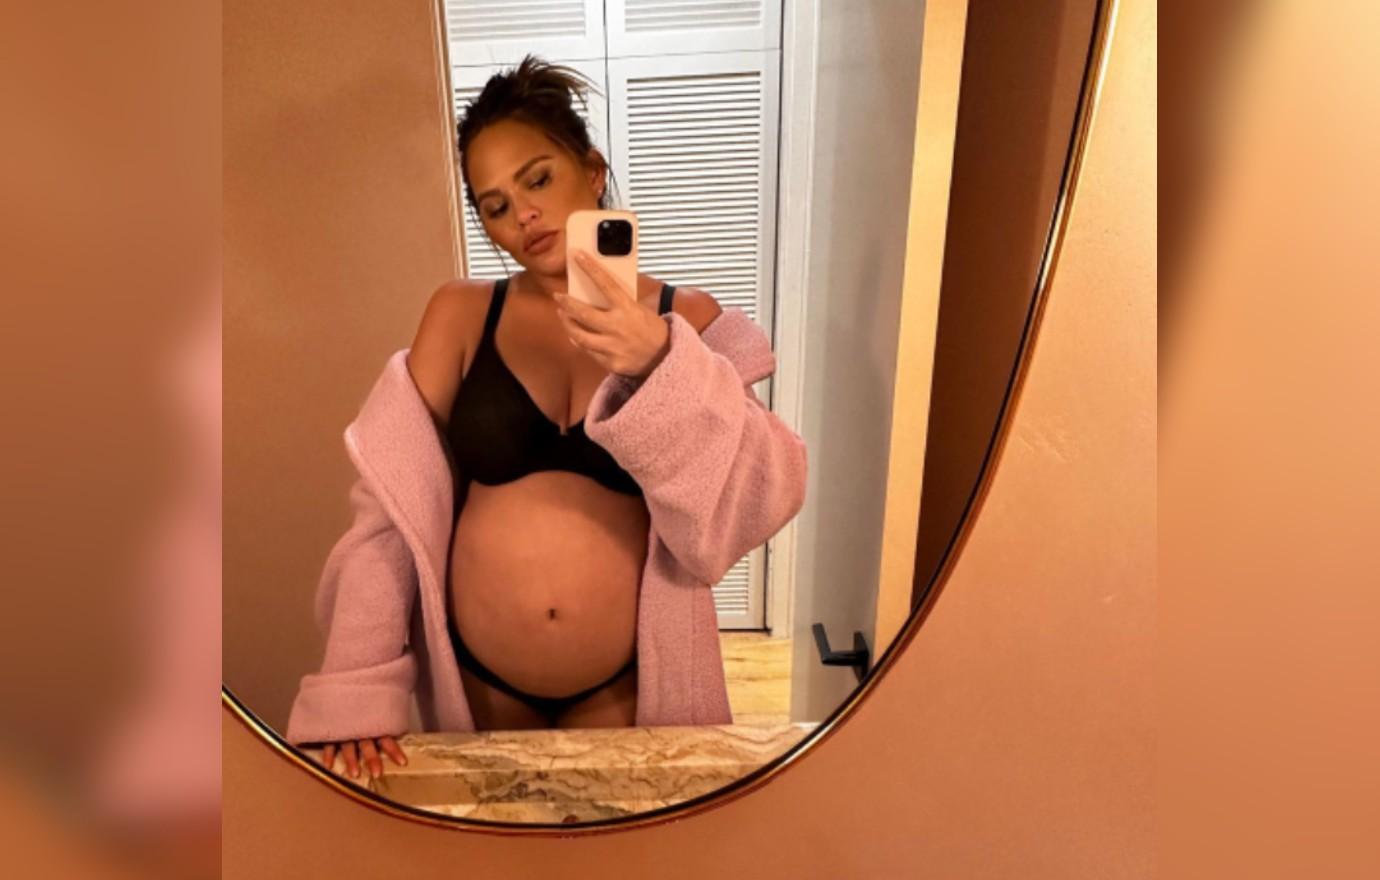 Chrissy Teigen Shows Off Bare Baby Bump In Robe: Photos